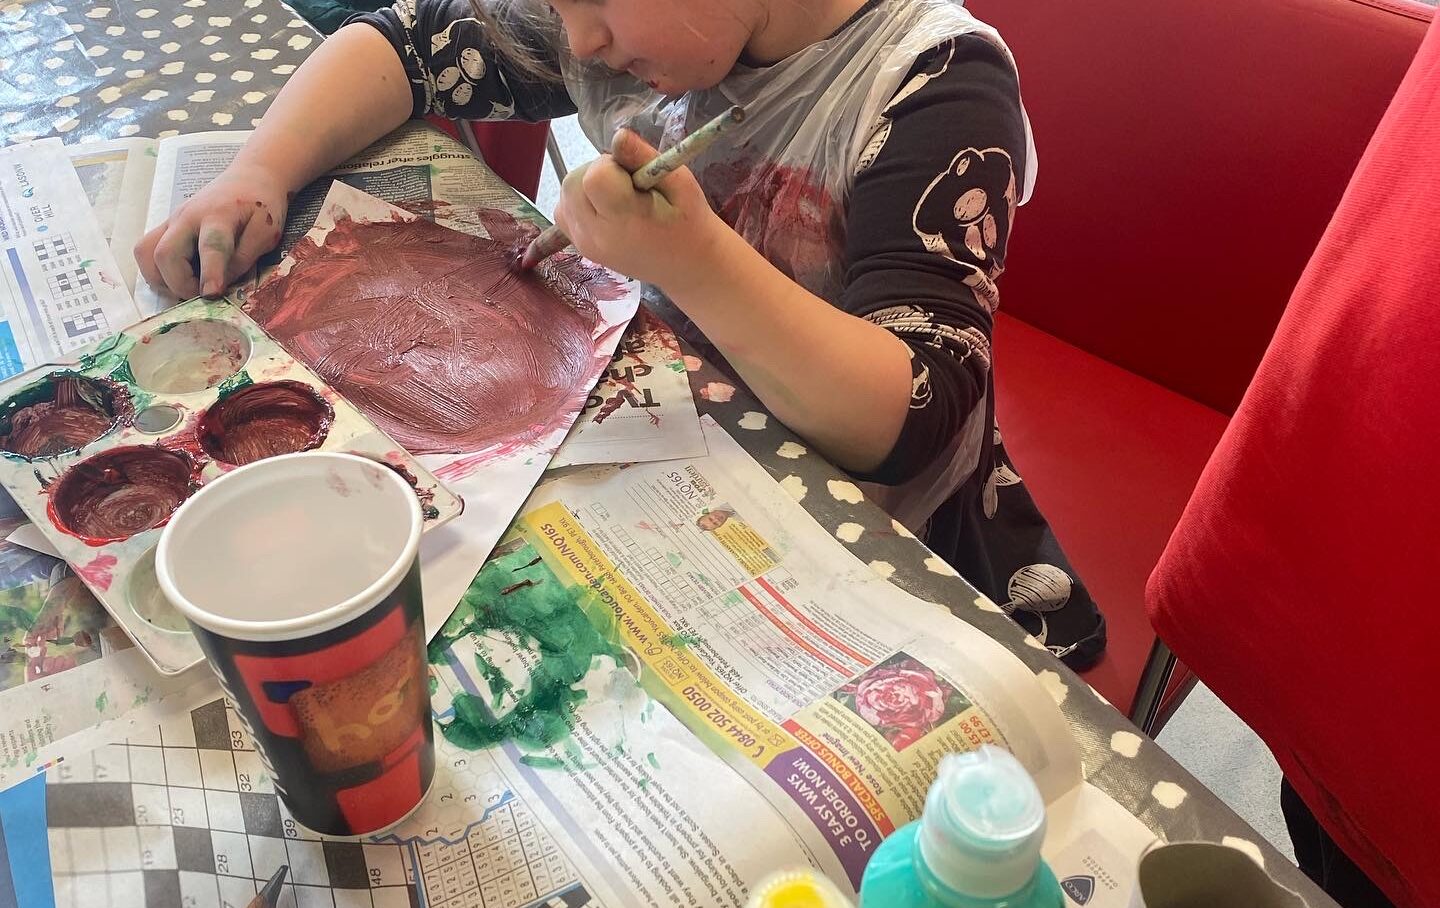 A girl is painting at a table.